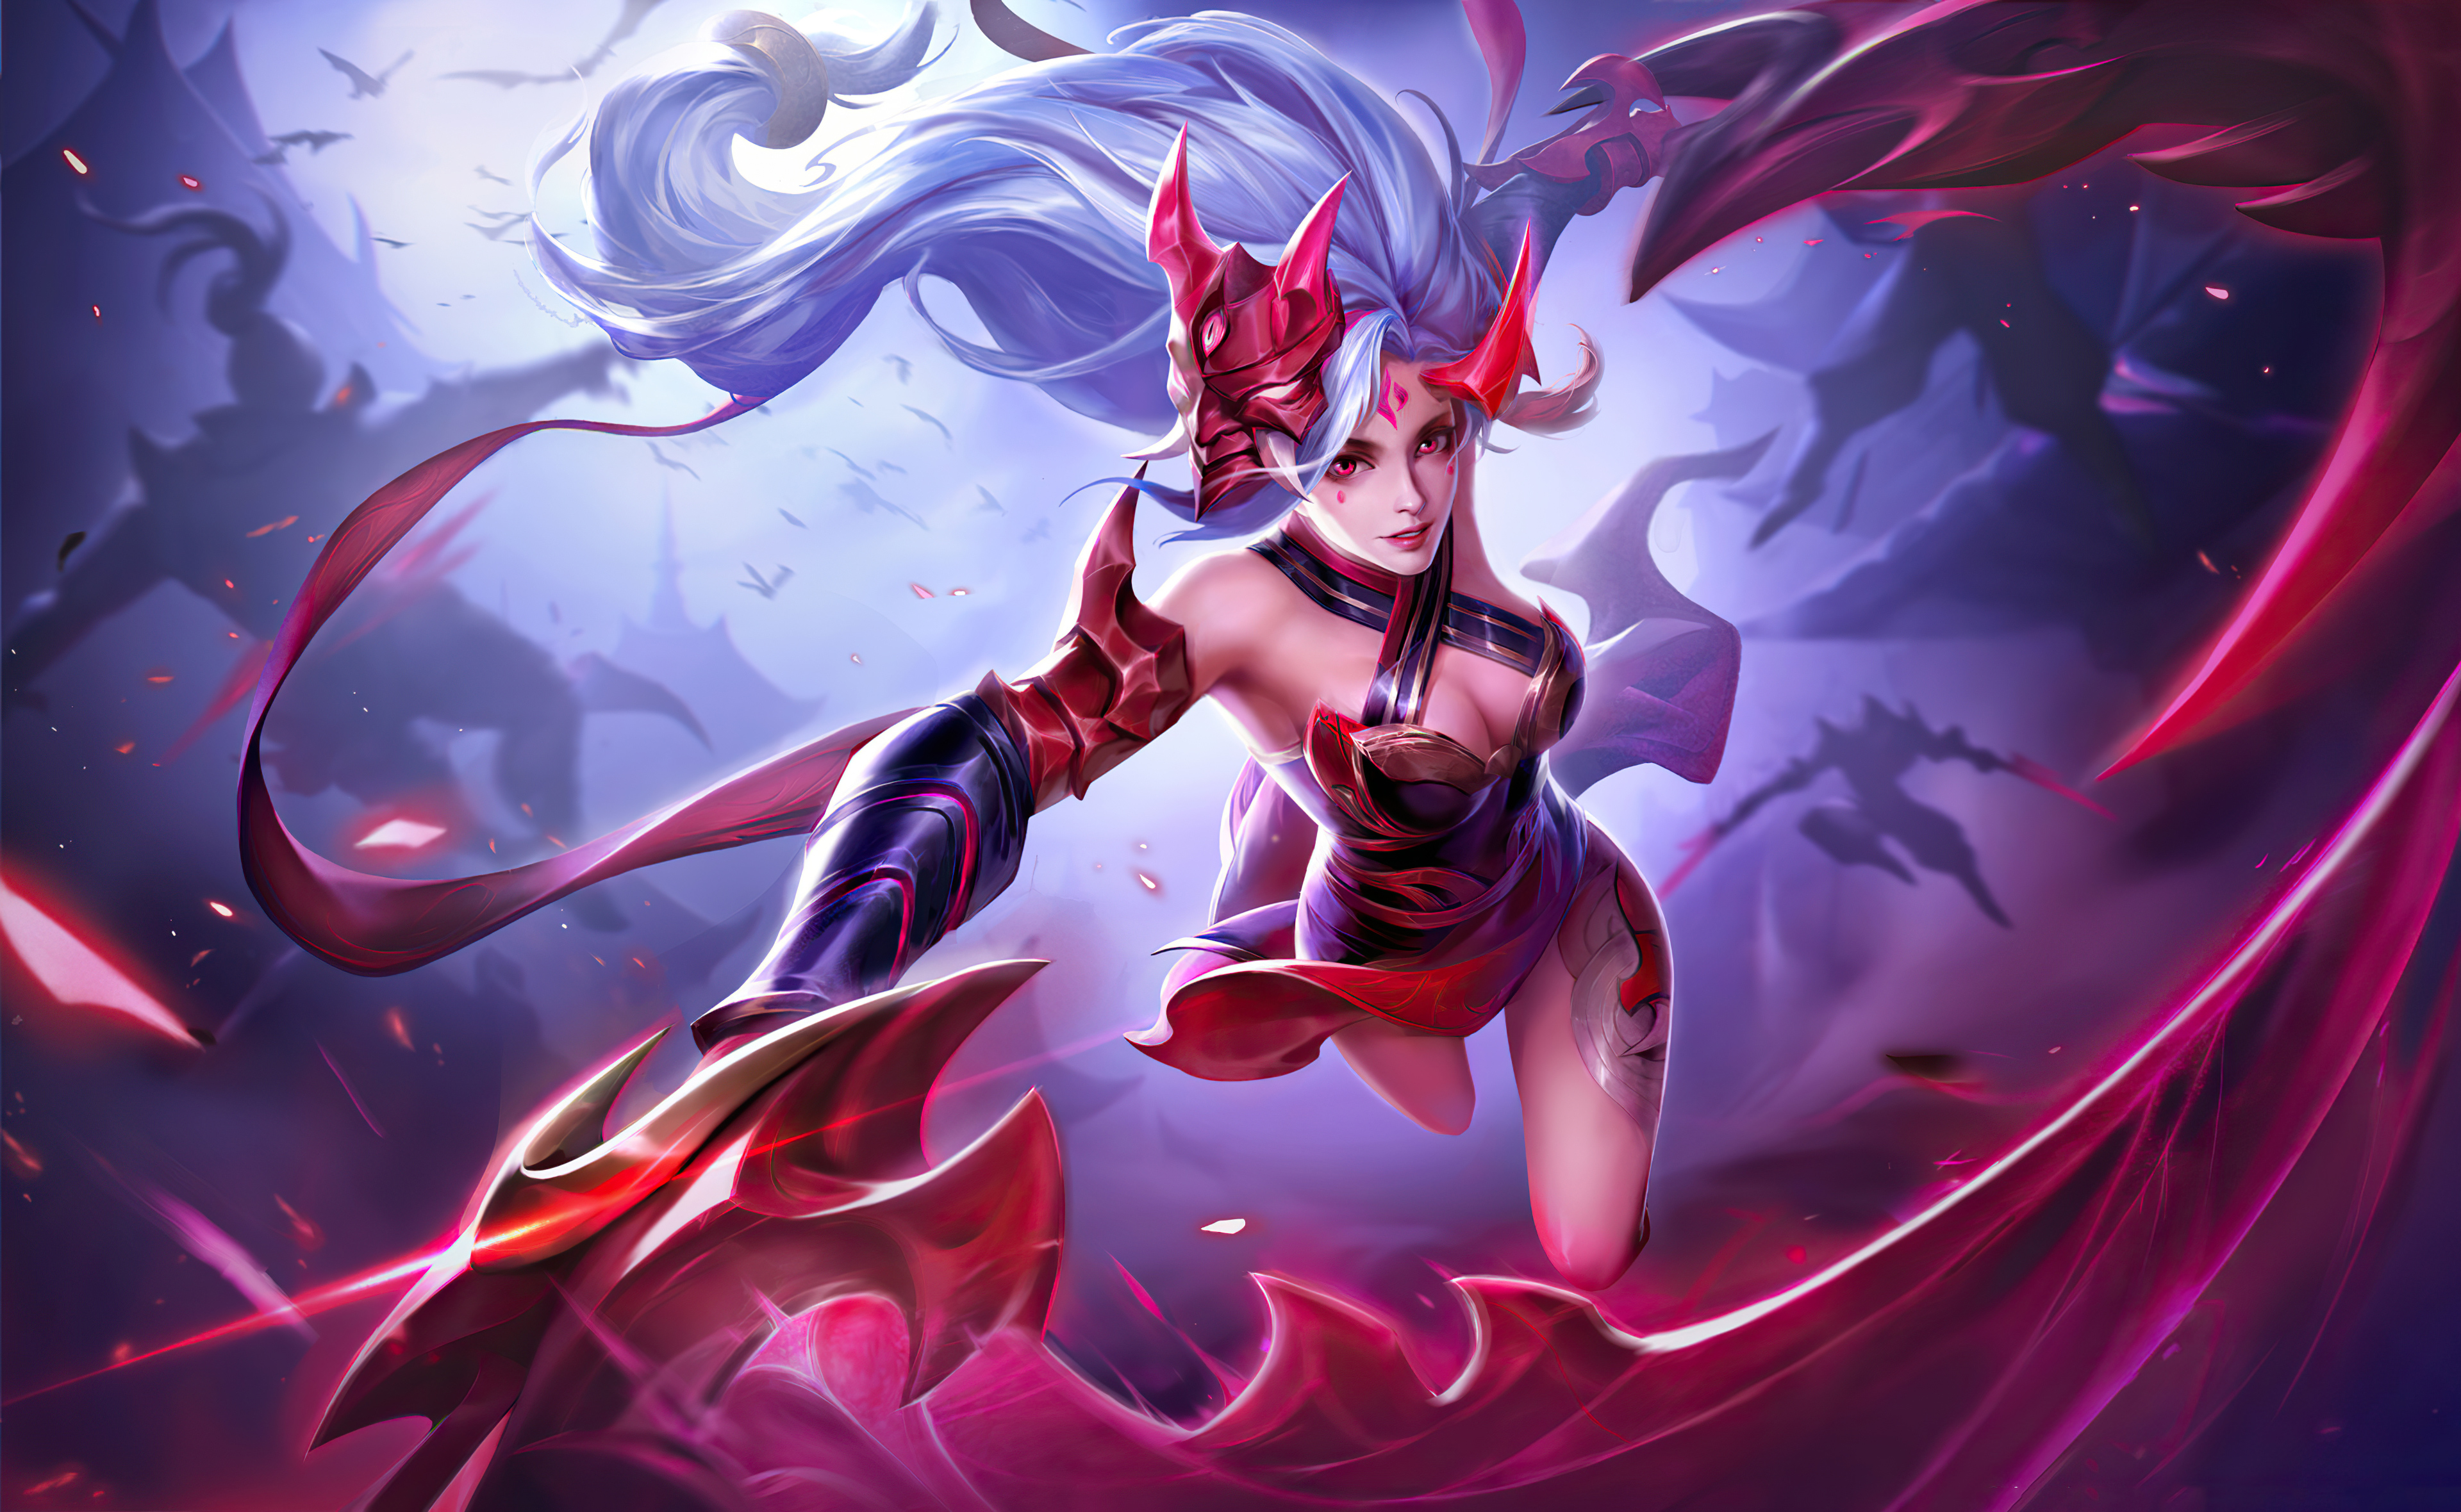 Yena Arena Of Valor 4k, HD Games, 4k Wallpapers, Images ...